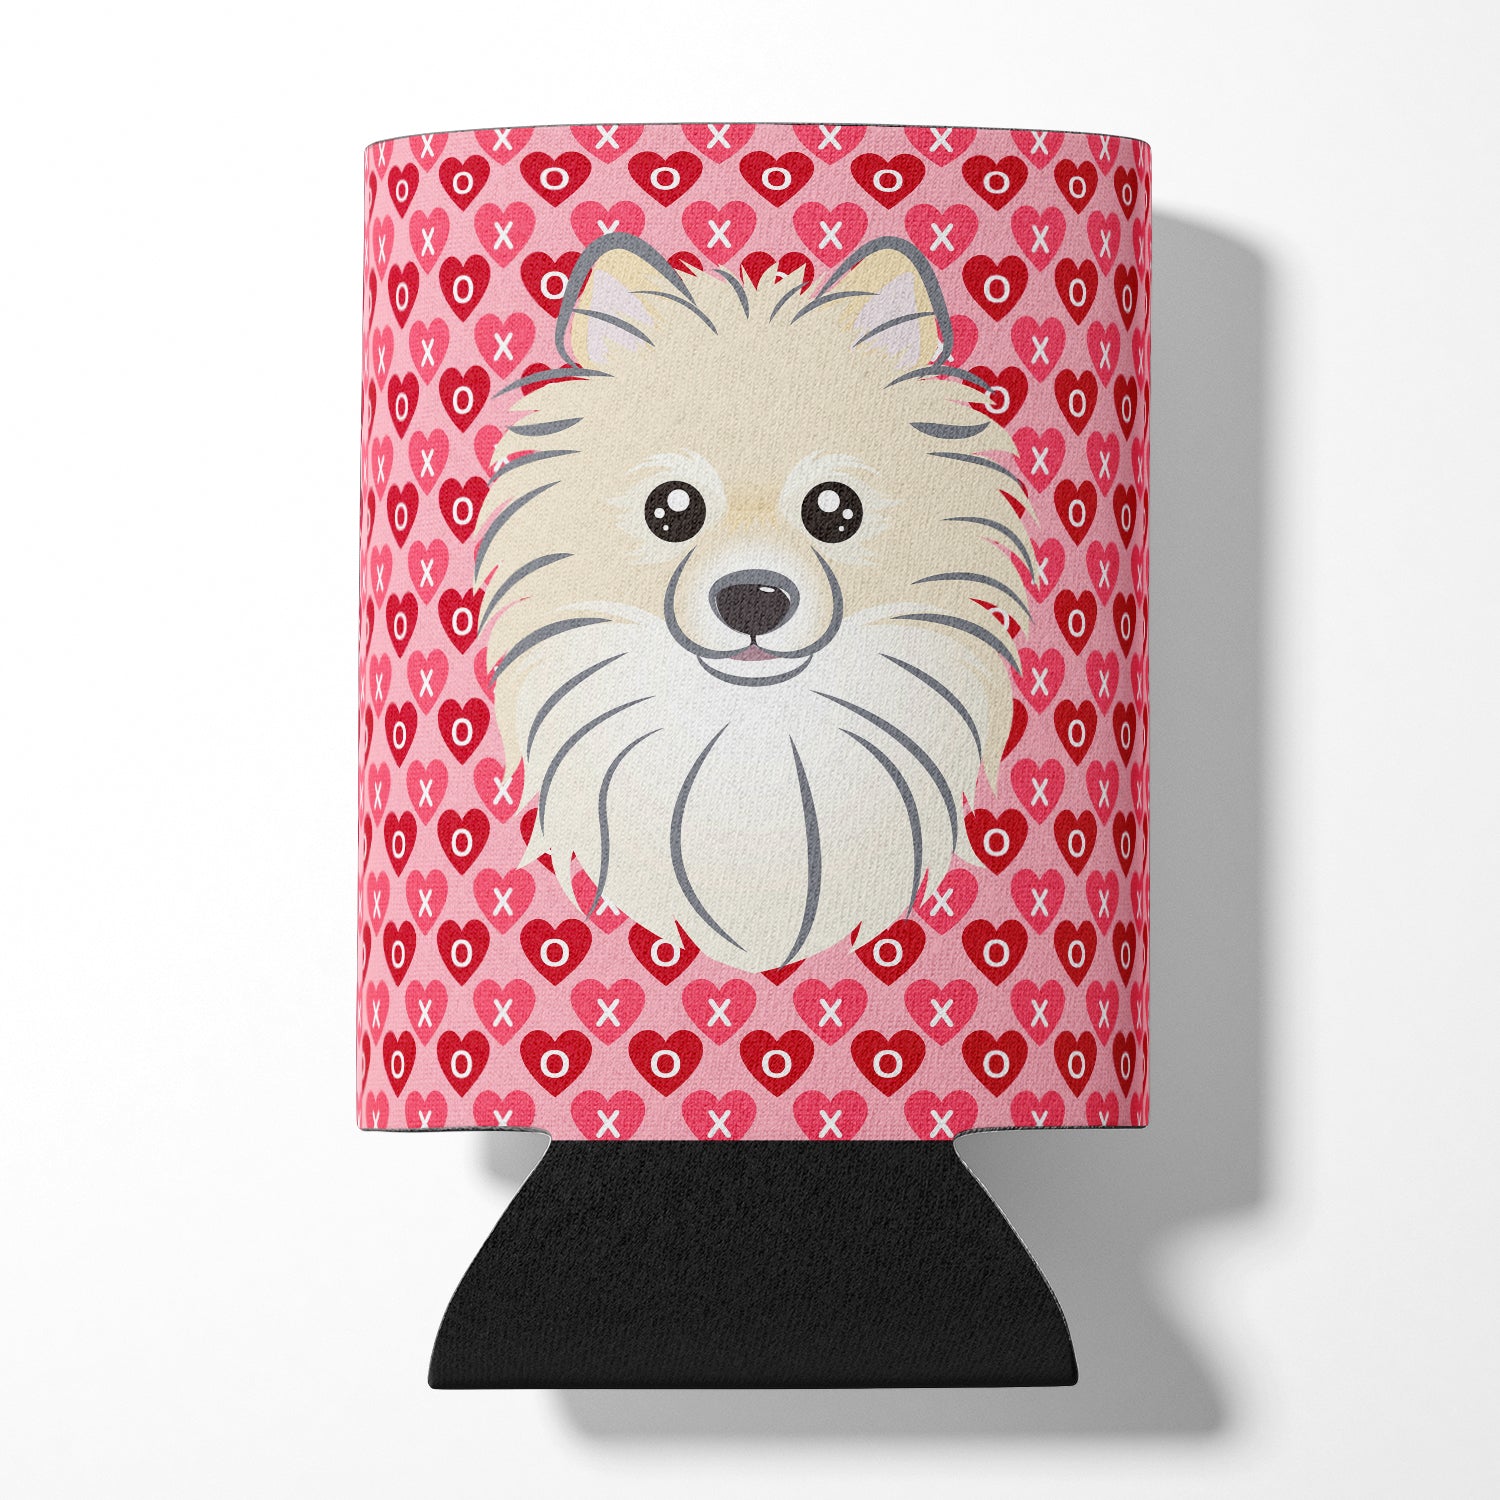 Pomeranian Hearts Can or Bottle Hugger BB5277CC  the-store.com.